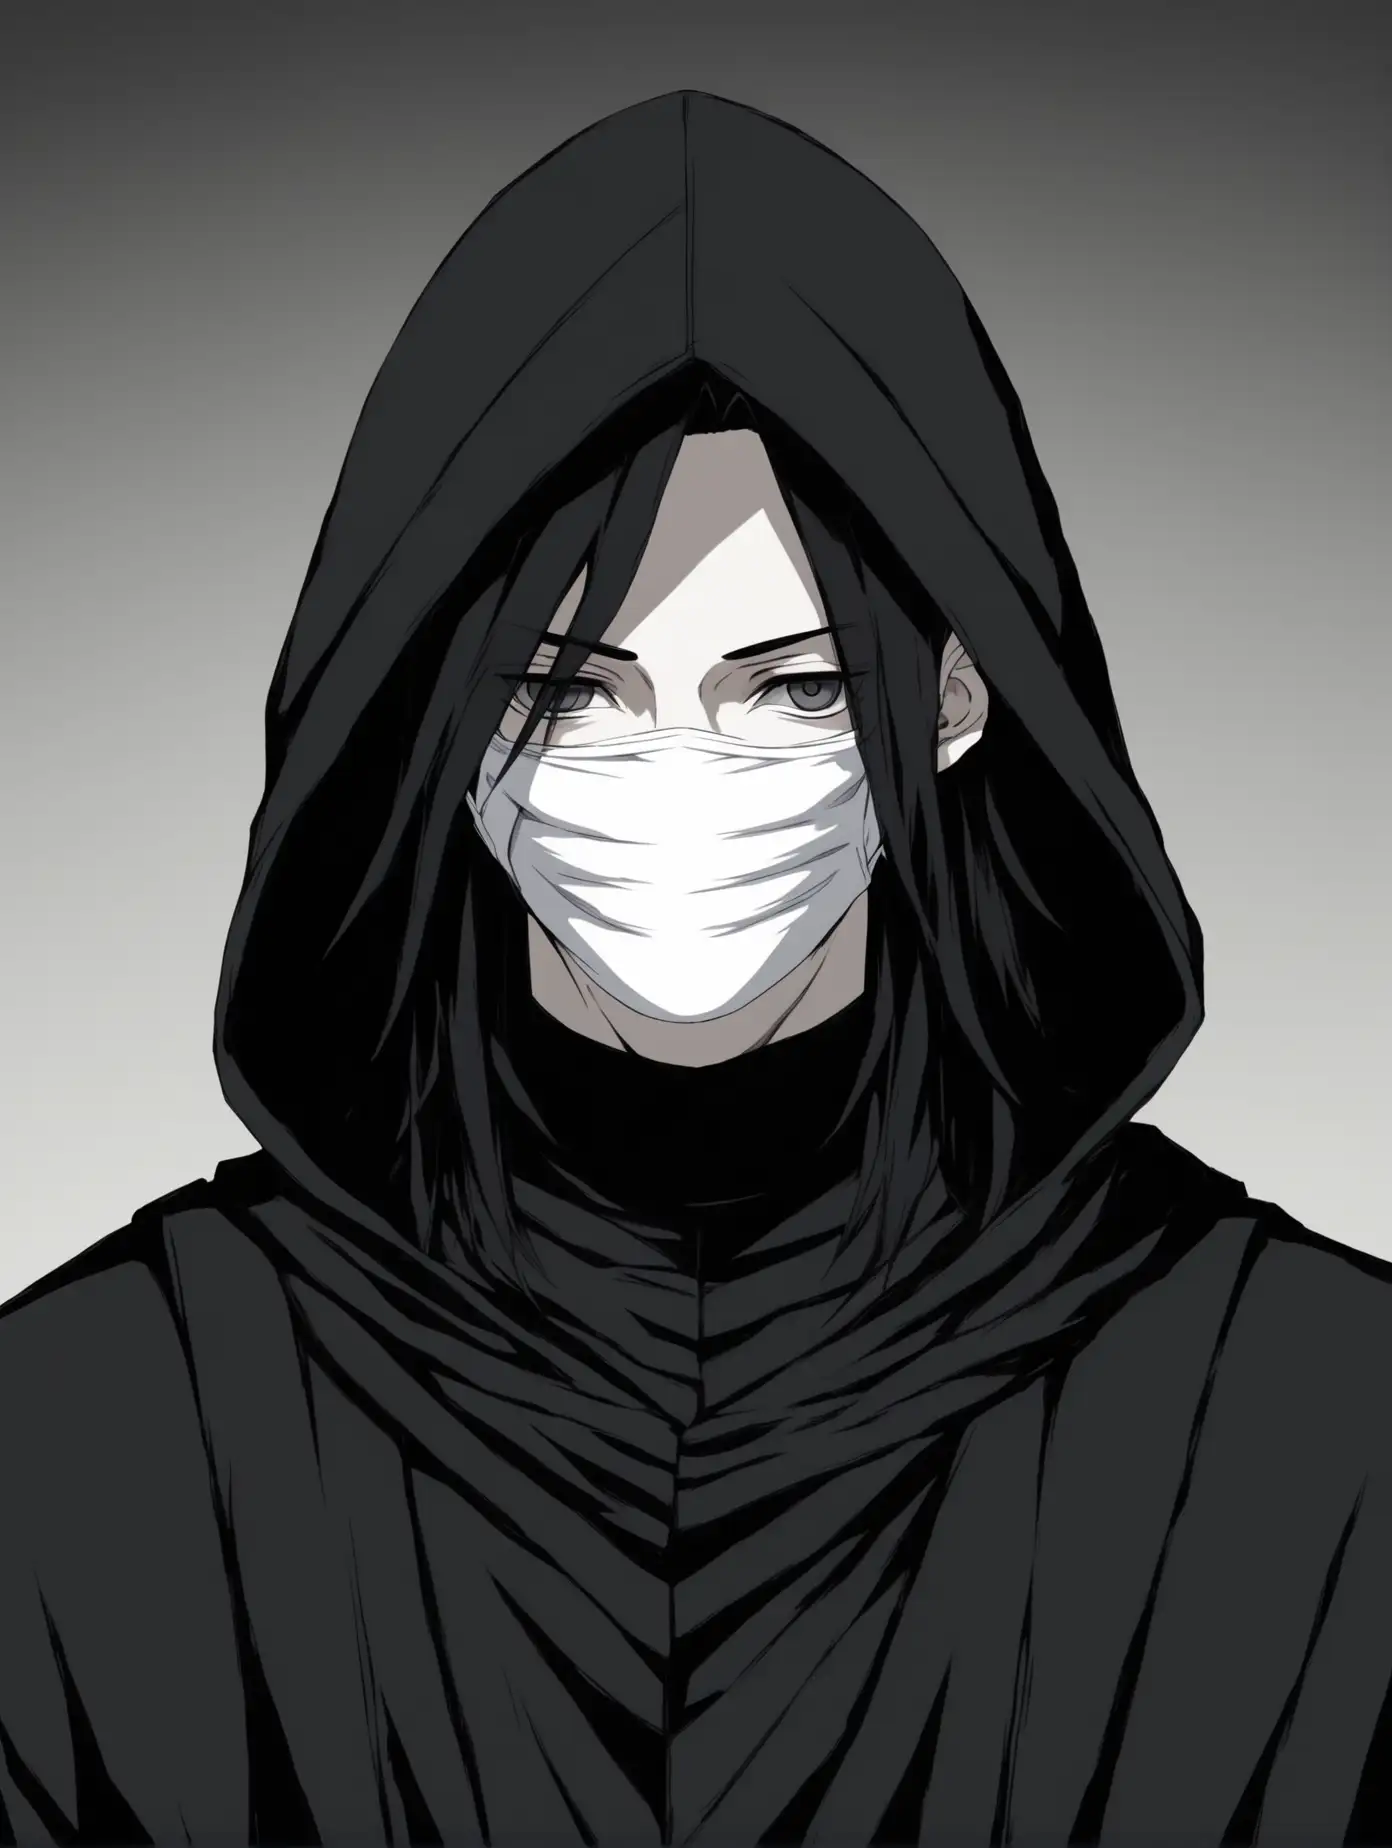 Mysterious-Anime-Character-with-White-Mask-Dark-Robed-Figure-in-Anime-Style